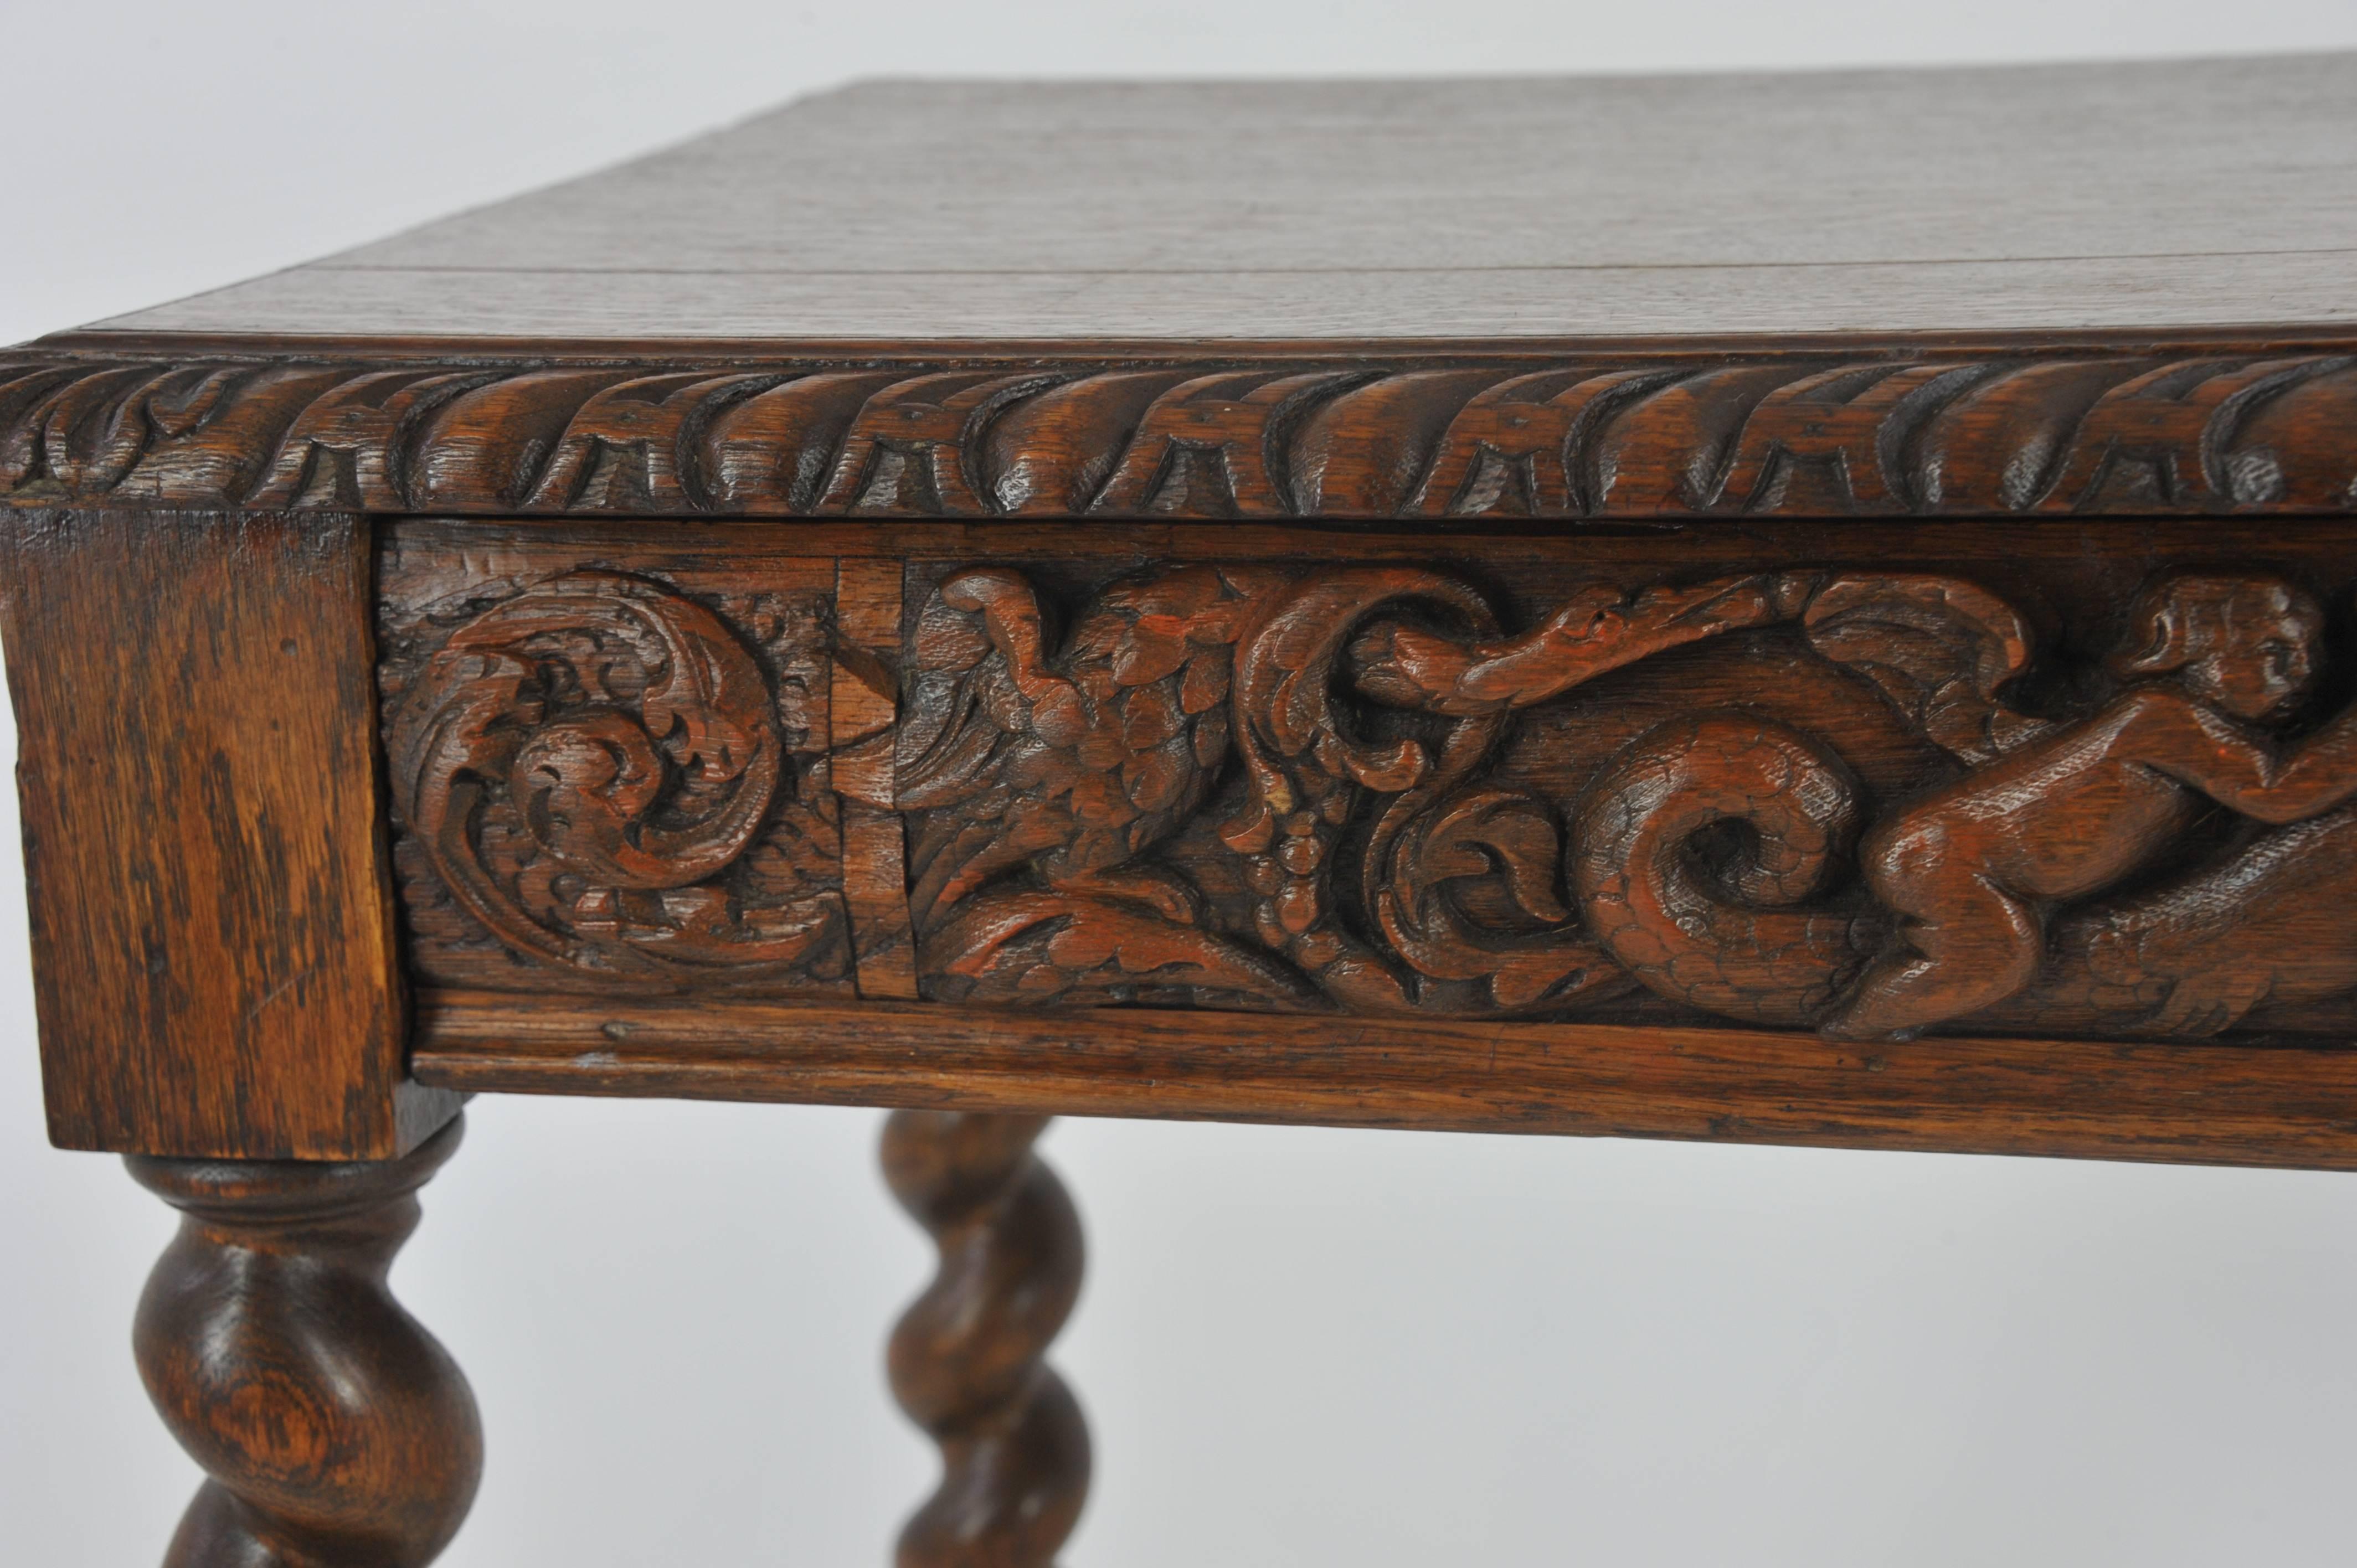 Antique writing table, antique oak desk, Victorian, Scotland, 1870

Scotland, 1879
Solid tiger oak construction
Tiger oak top with carved border around all four sides
Single carved drawer in front
All other three sides have carved panels
Sitting on